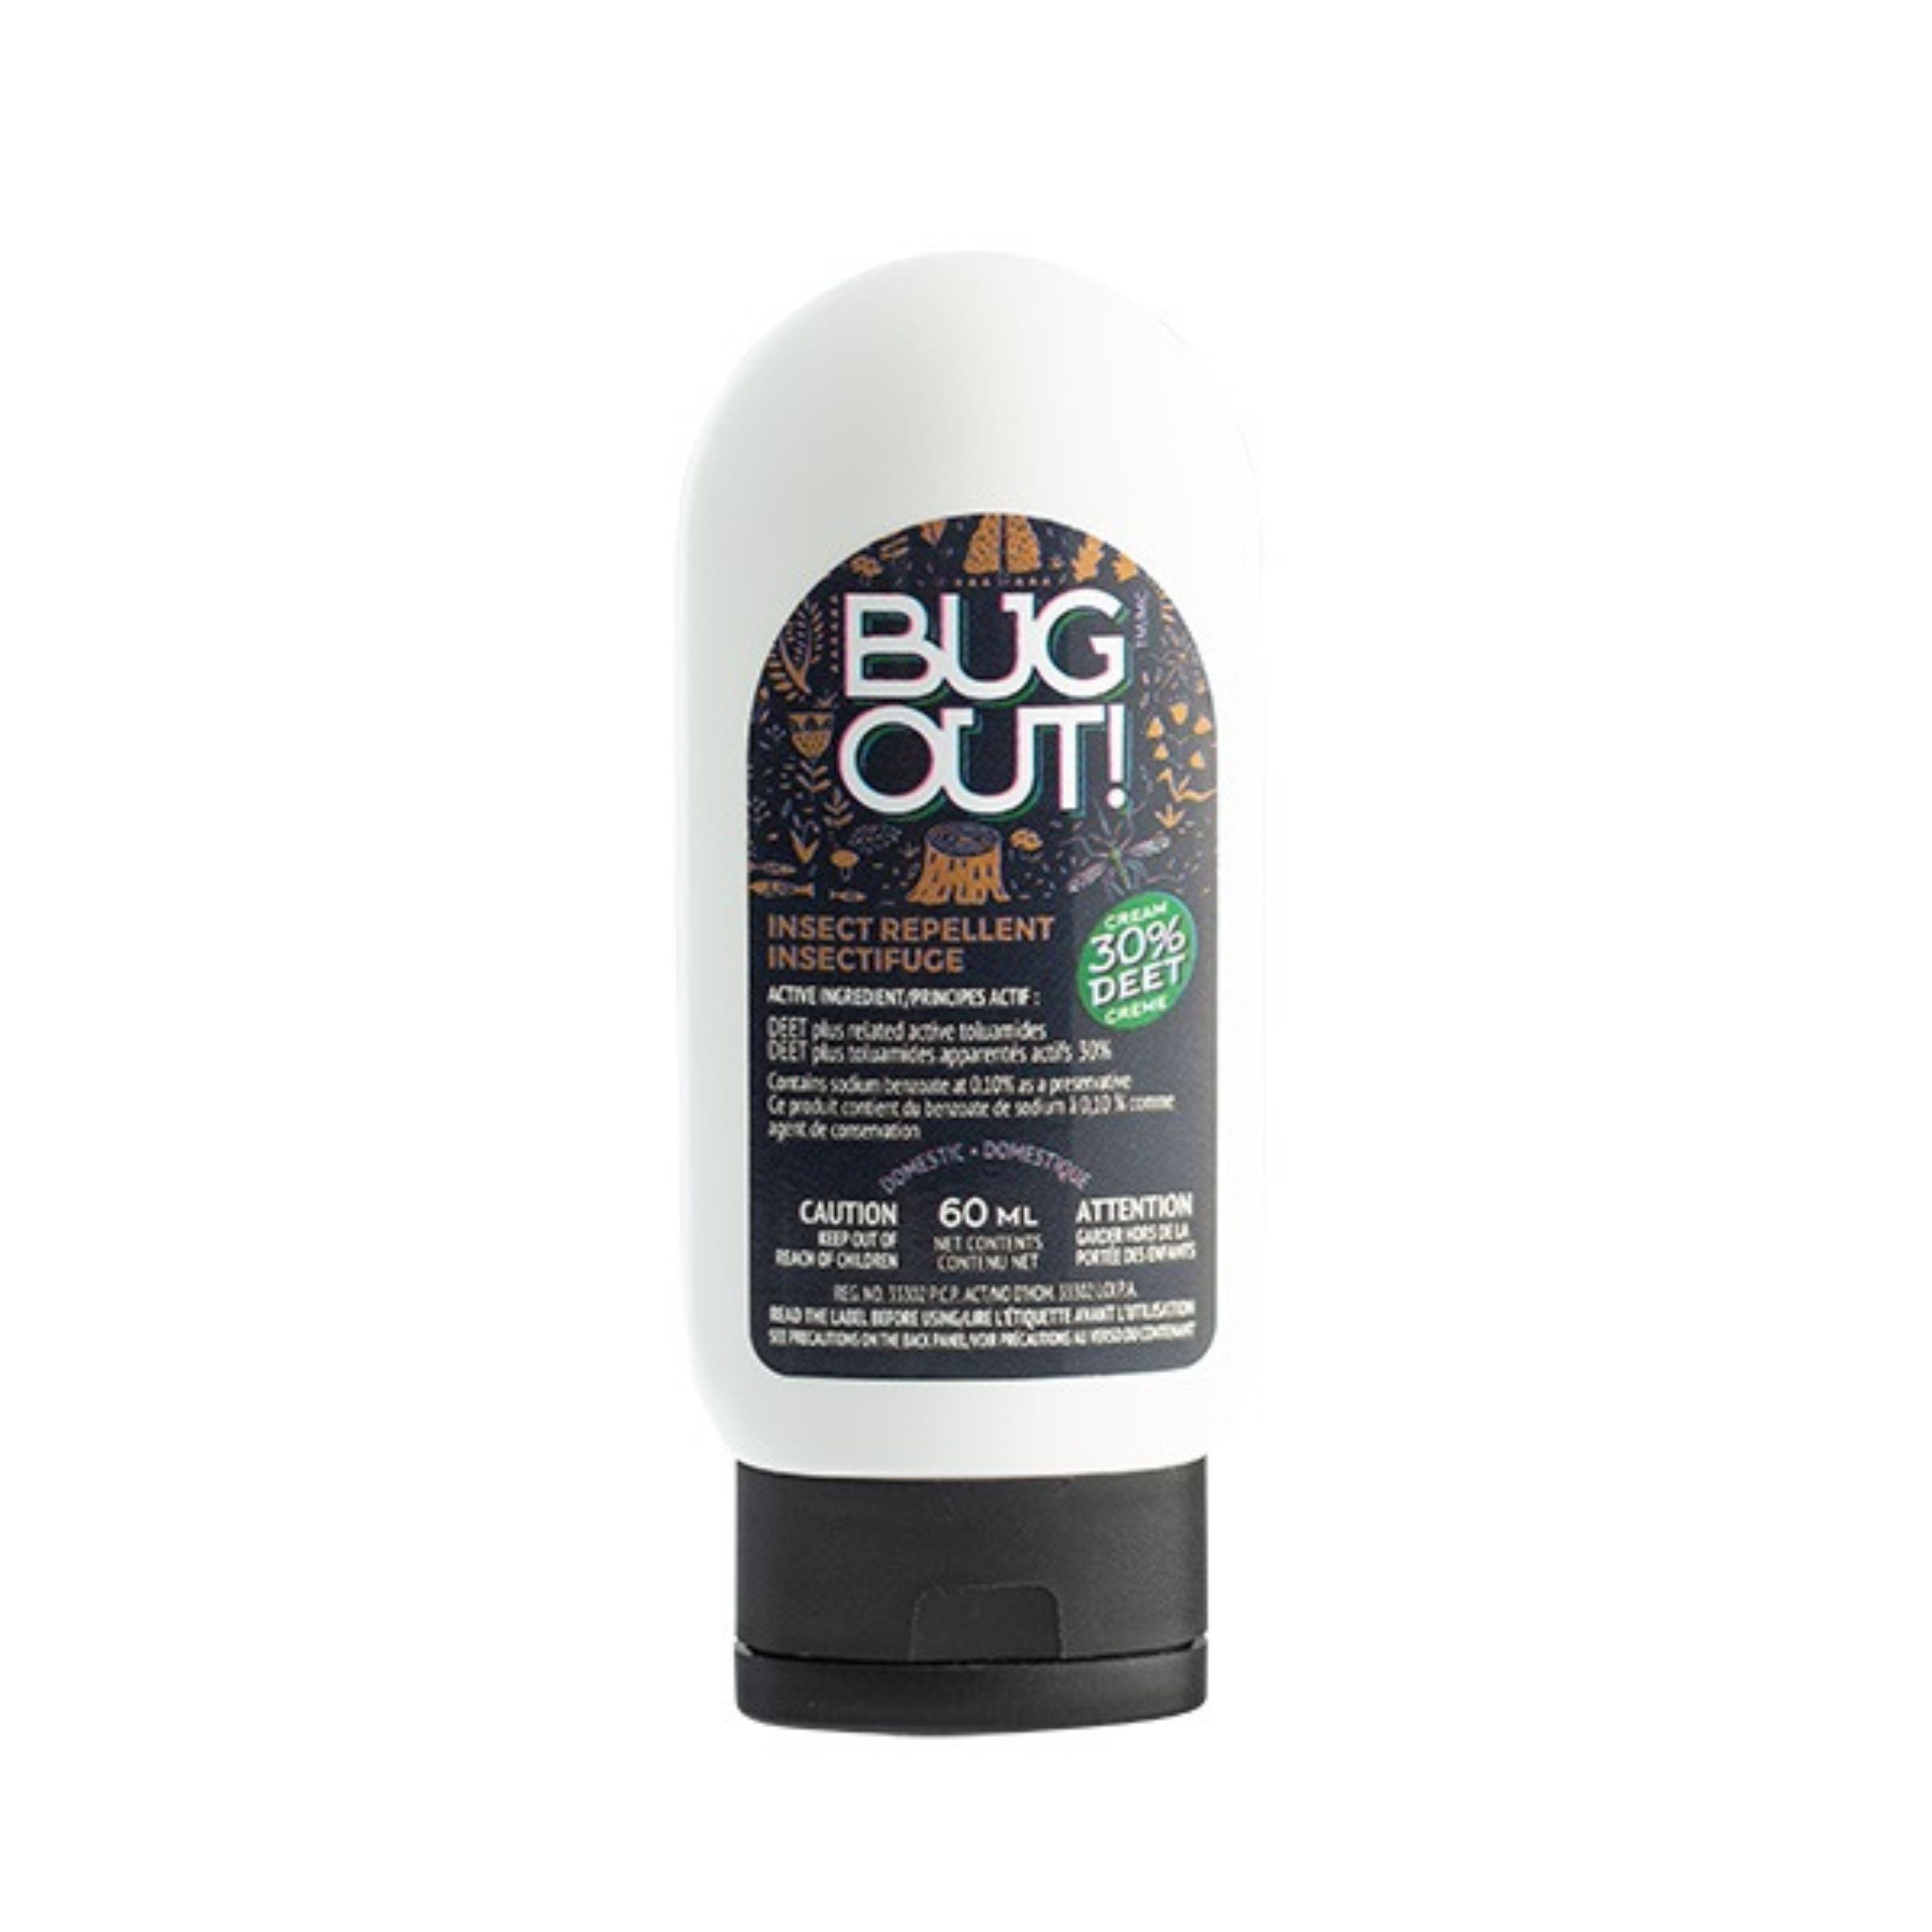 Insect repellent lotion - 30% Deet